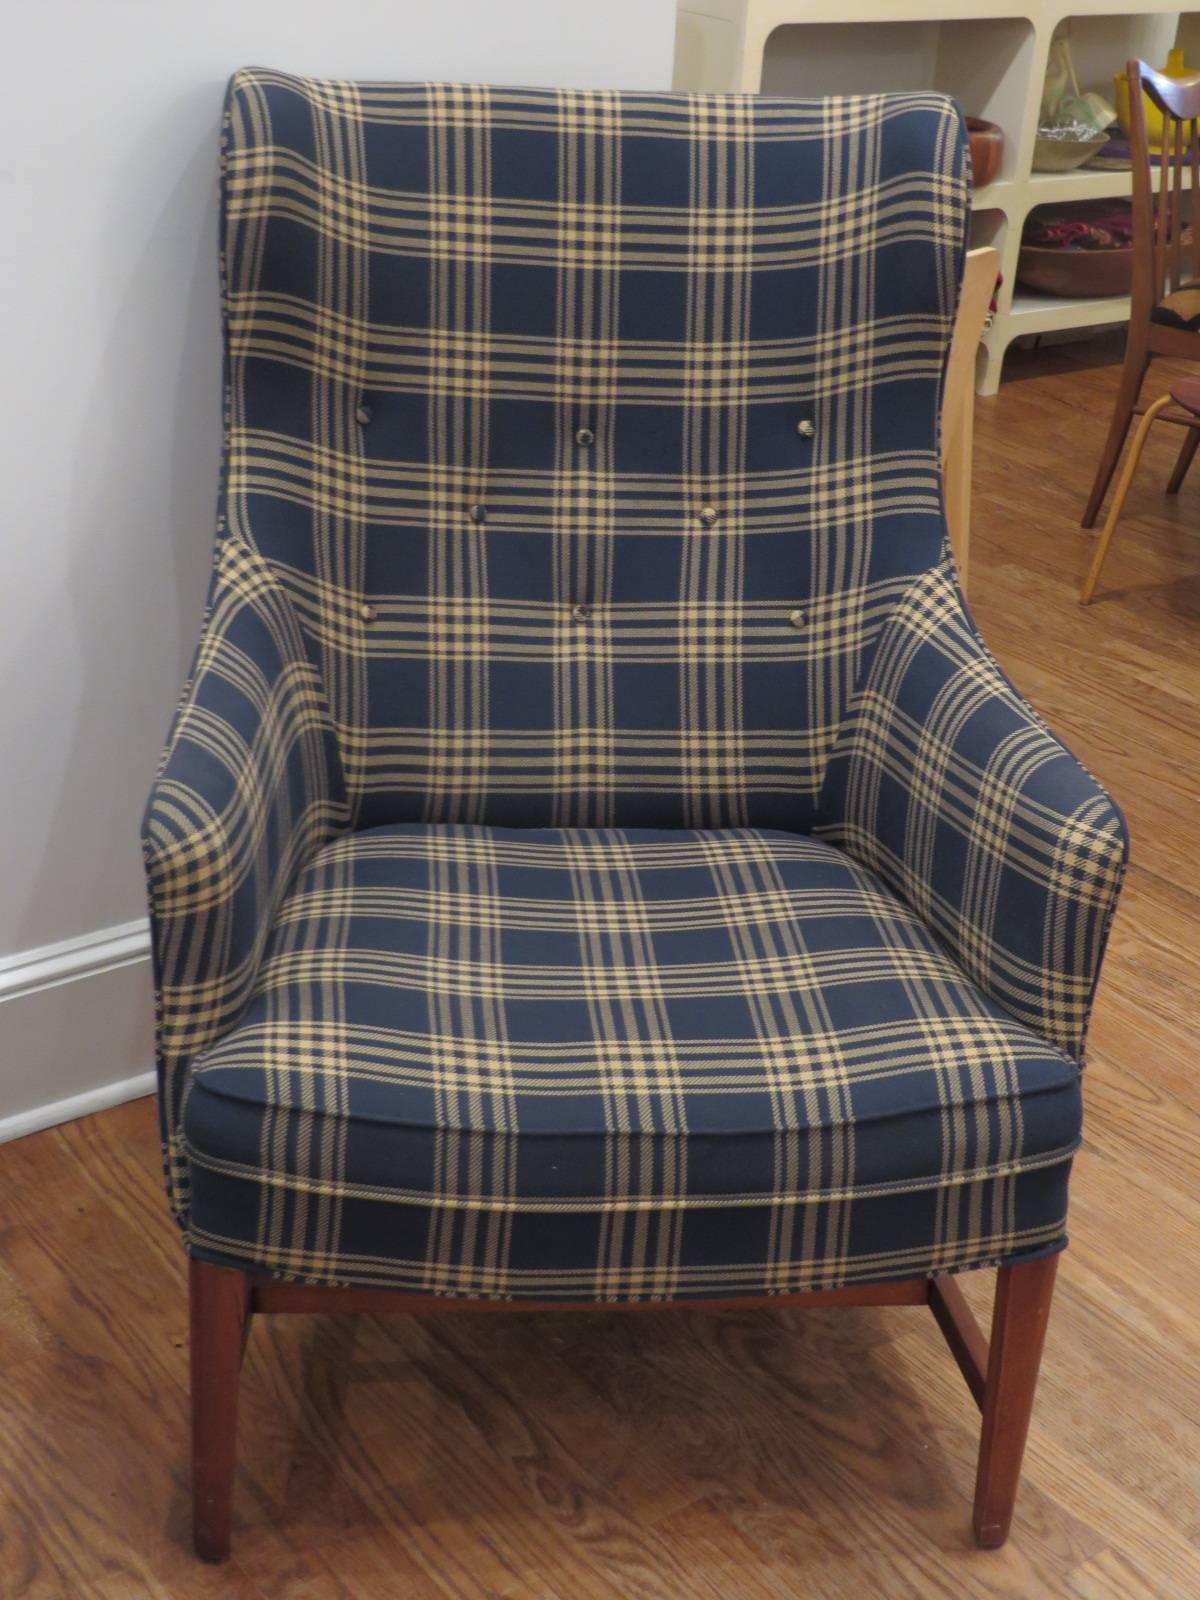 Comfortable wing chair in vintage Schumacher plaid. Looks great and would be perfect in any room. Great reading or relaxing chair.